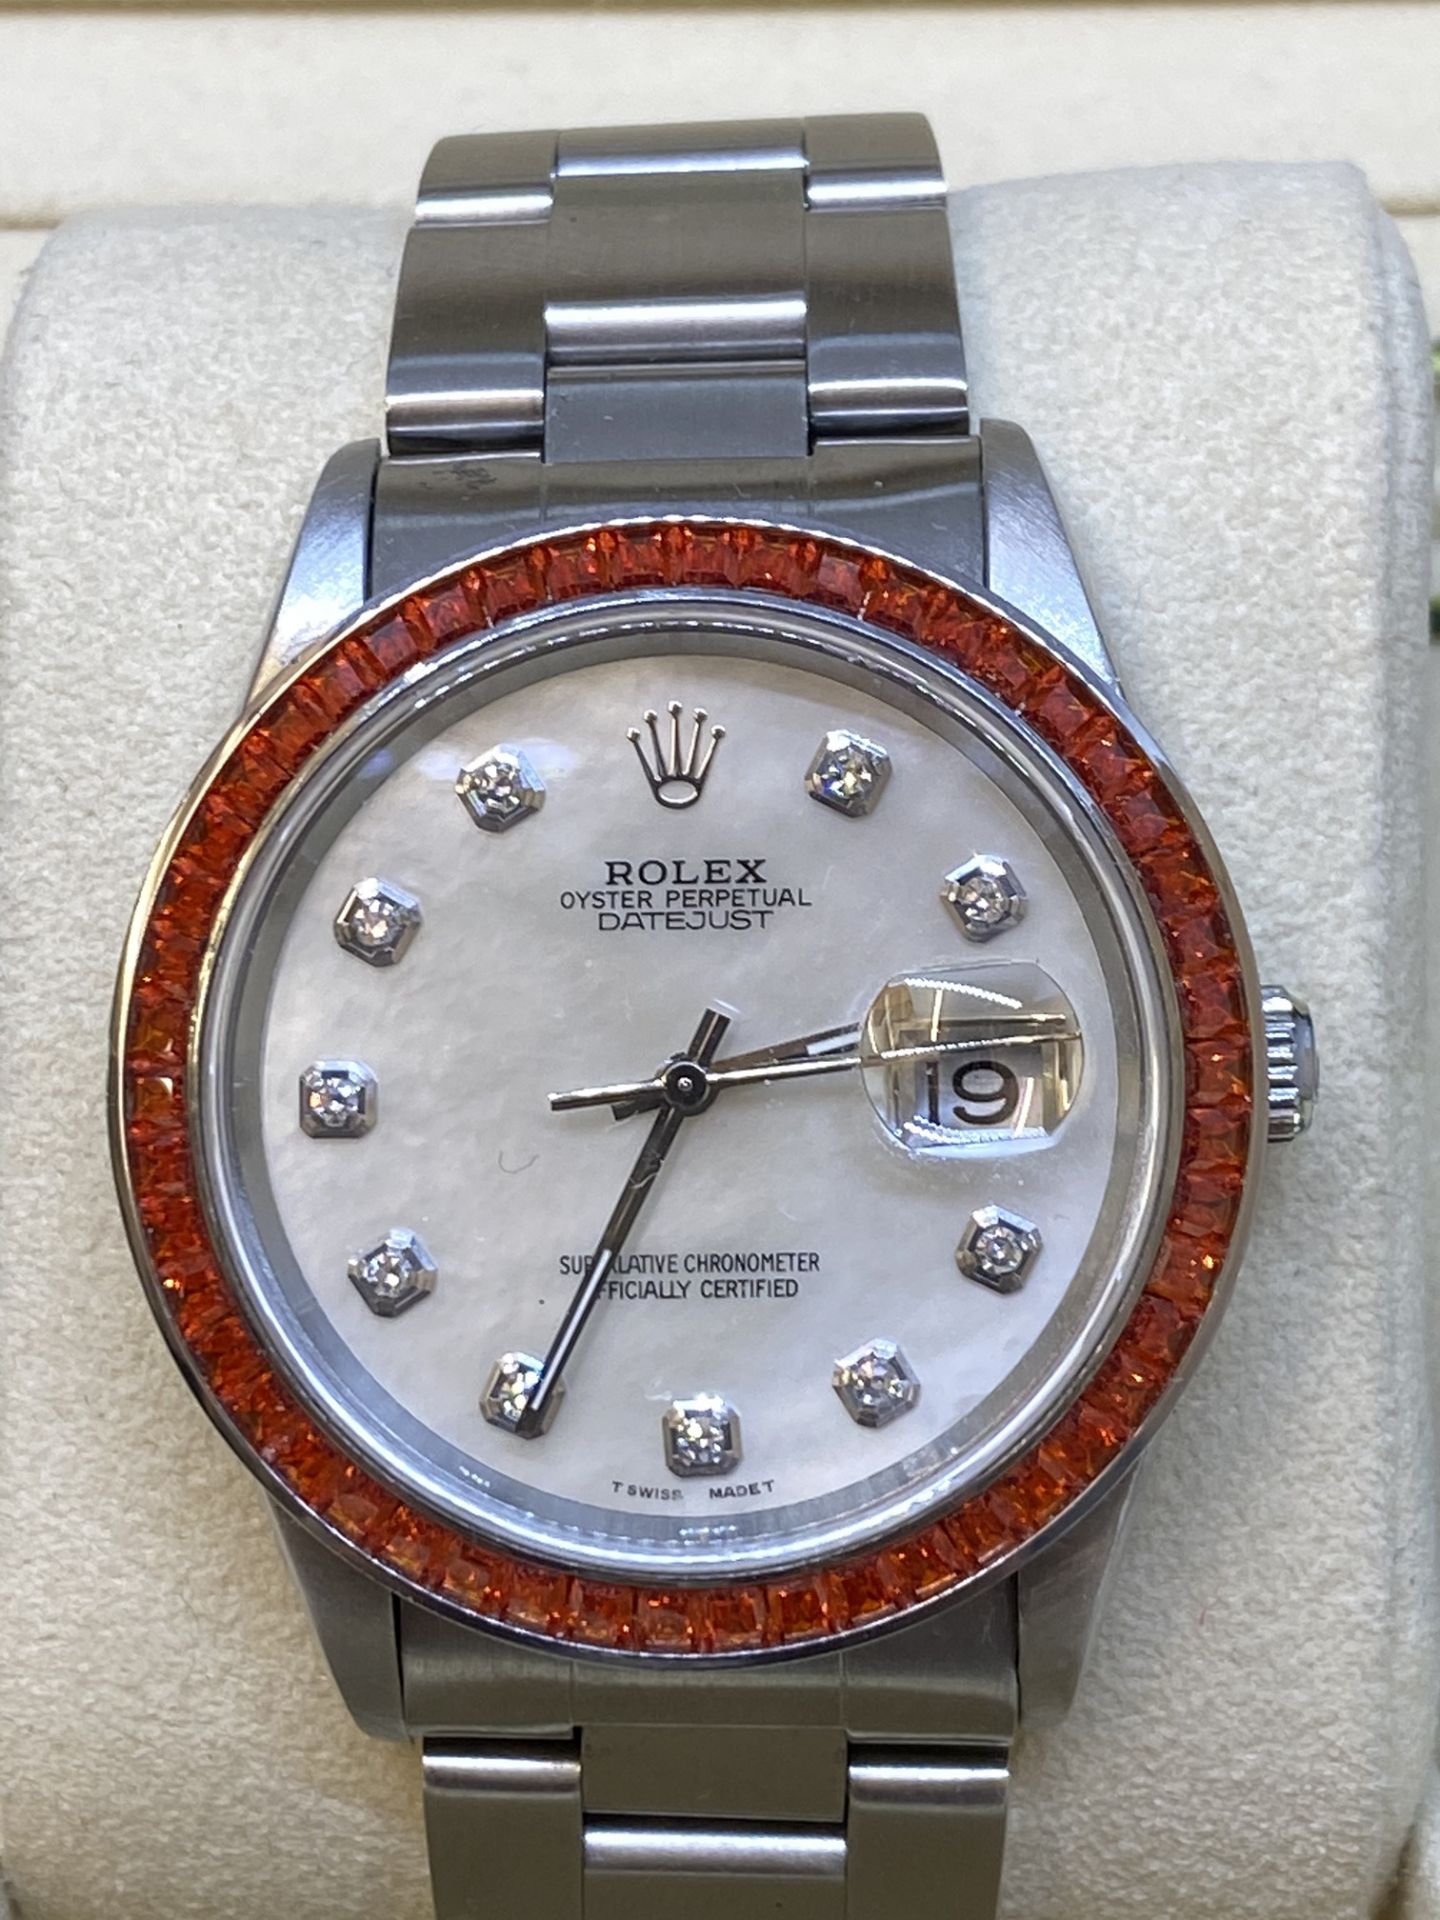 Rolex Stainless Steel Watch 16200 with Box - Set with Diamond dial & Orange Stone Set Bezel - Image 4 of 12